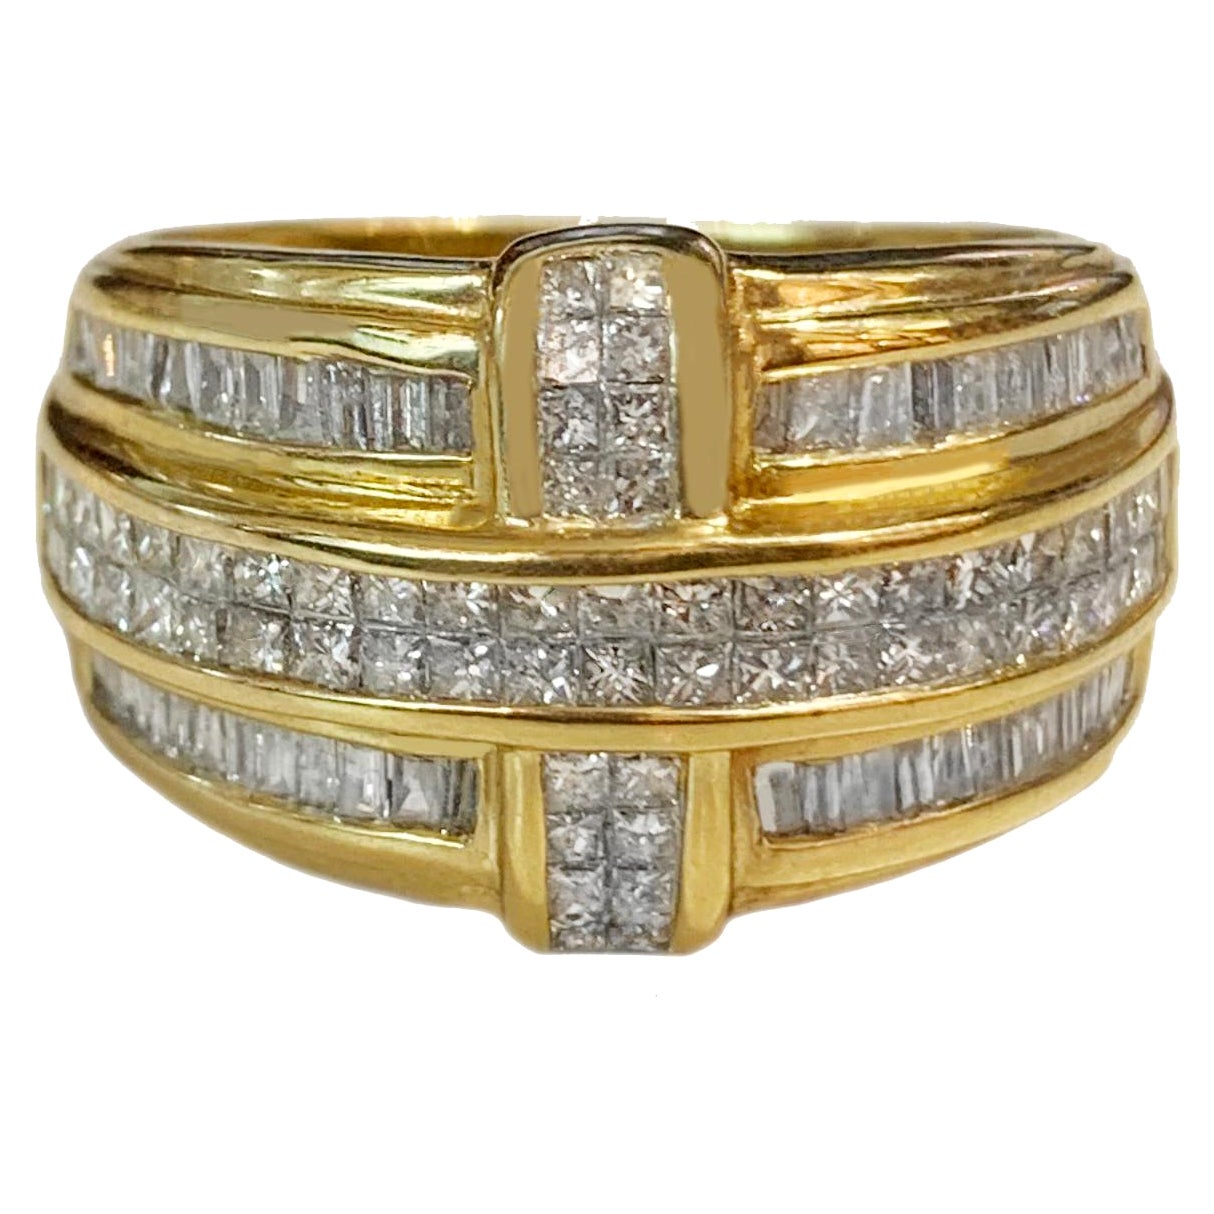 Sparkle 14k Yellow Gold Ring with 2.75ct Diamonds, VS/G For Sale